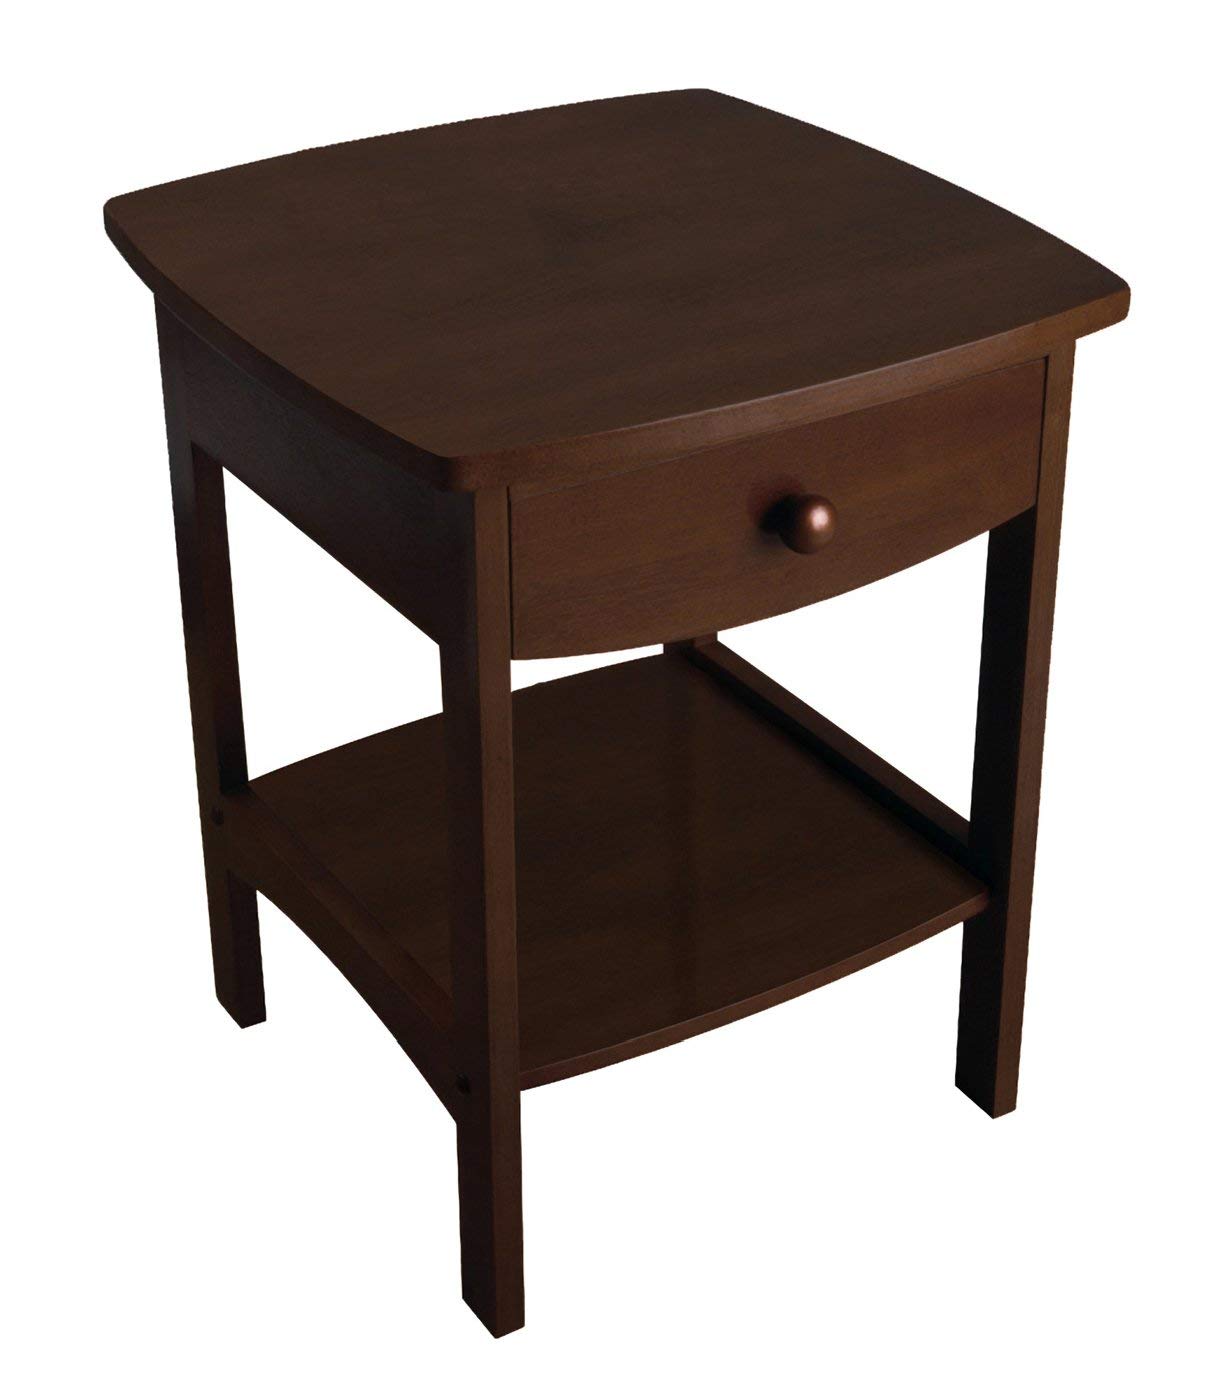 winsome wood claire accent table walnut kitchen dark dining mirrored coffee with storage rustic barnwood furniture console pottery barn corner desk sofa tray ikea windham